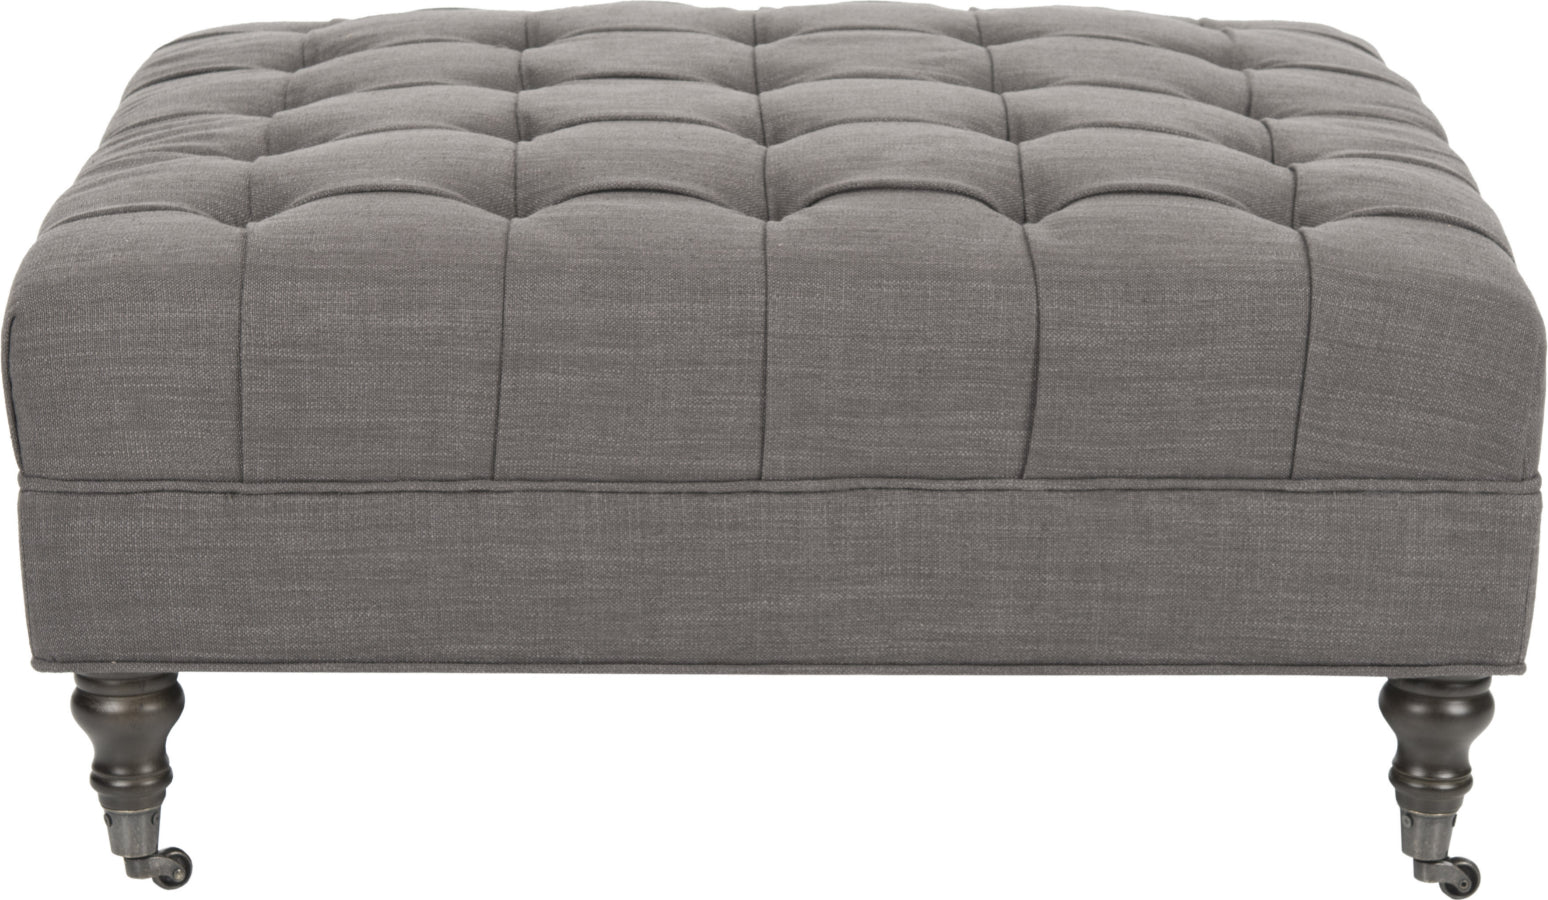 Safavieh Clark Tufted Cocktail Ottoman Charcoal Brown and Espresso Furniture main image